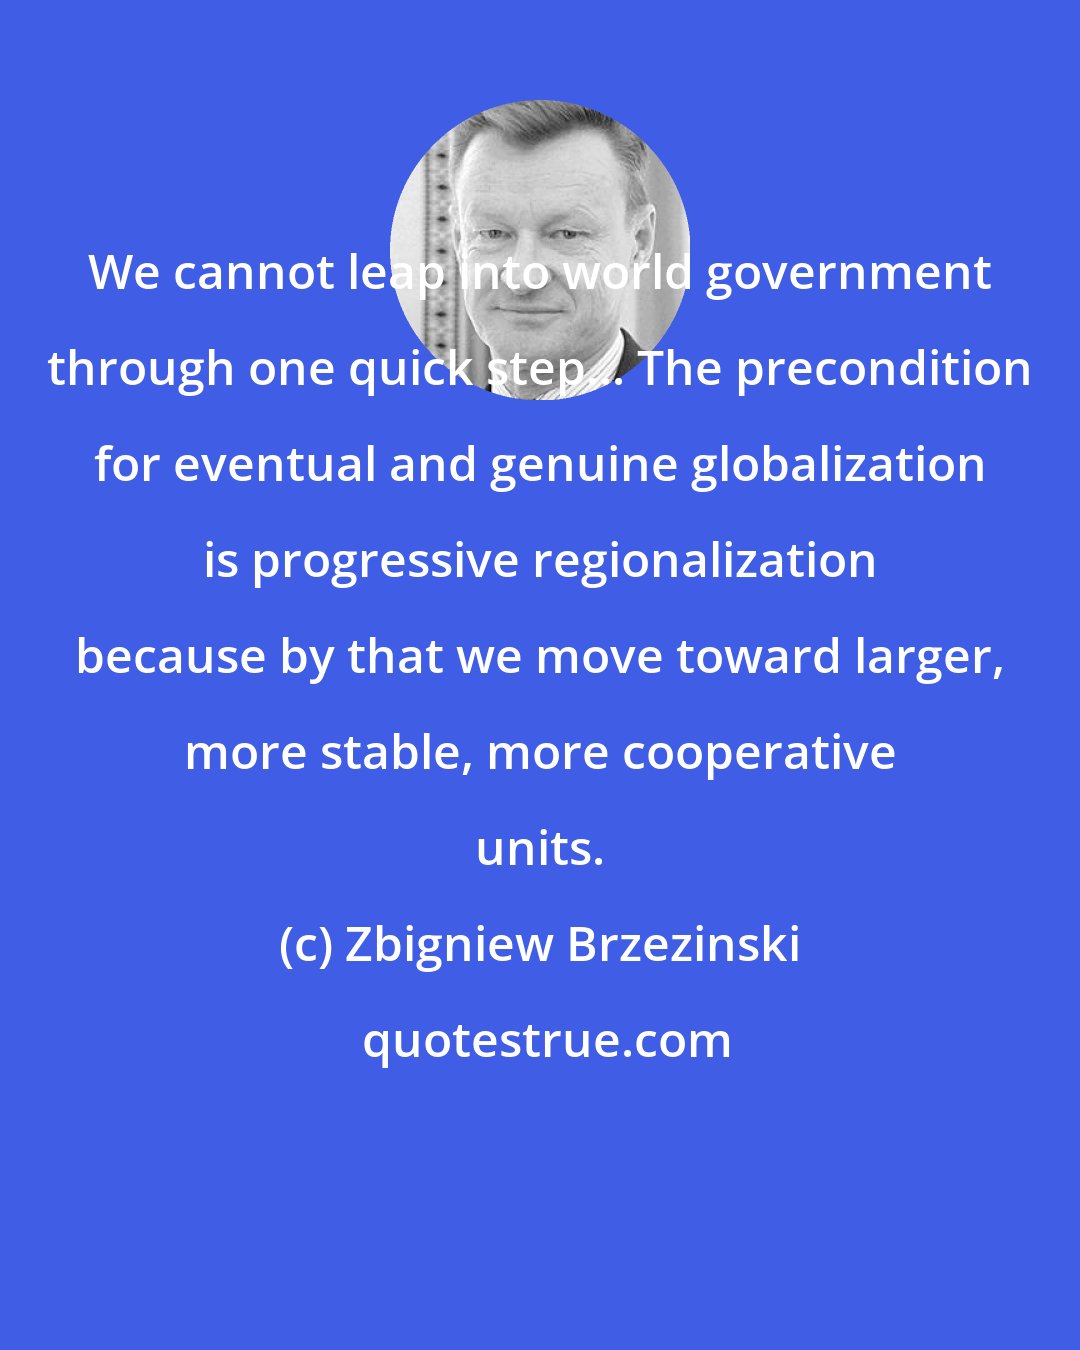 Zbigniew Brzezinski: We cannot leap into world government through one quick step... The precondition for eventual and genuine globalization is progressive regionalization because by that we move toward larger, more stable, more cooperative units.